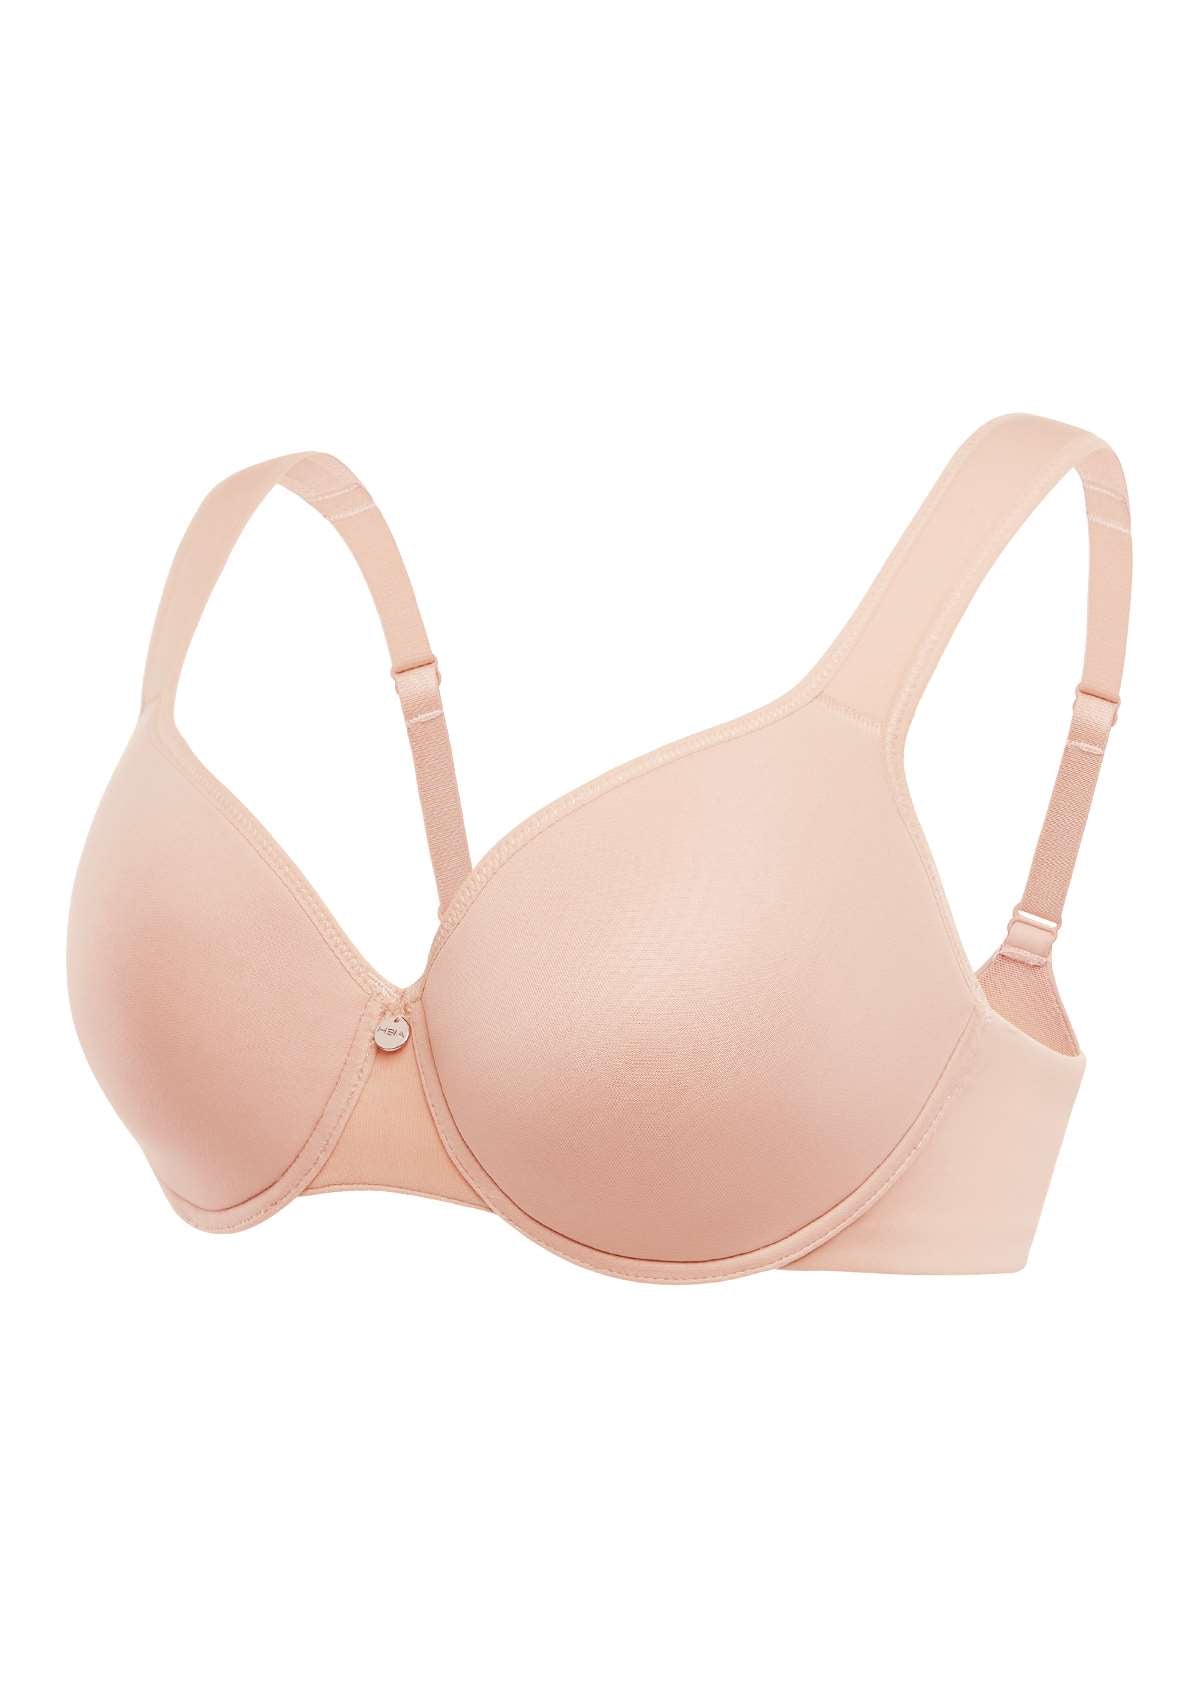 HSIA Patricia Smooth Classic T-shirt Lightly Padded Minimizer Bra - Light Pink / 44 / G